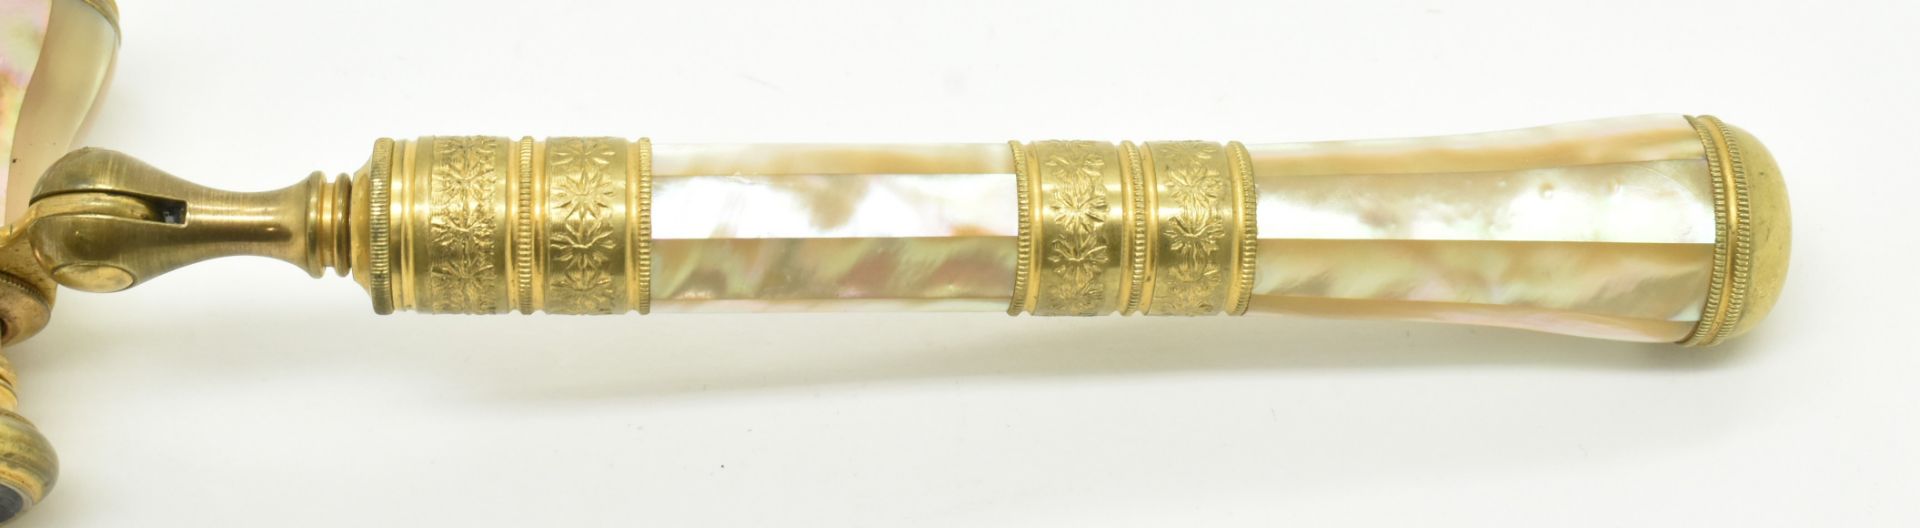 FRENCH 19TH CENTURY PAIR OF MOTHER OF PEARL OPERA GLASSES - Image 6 of 7